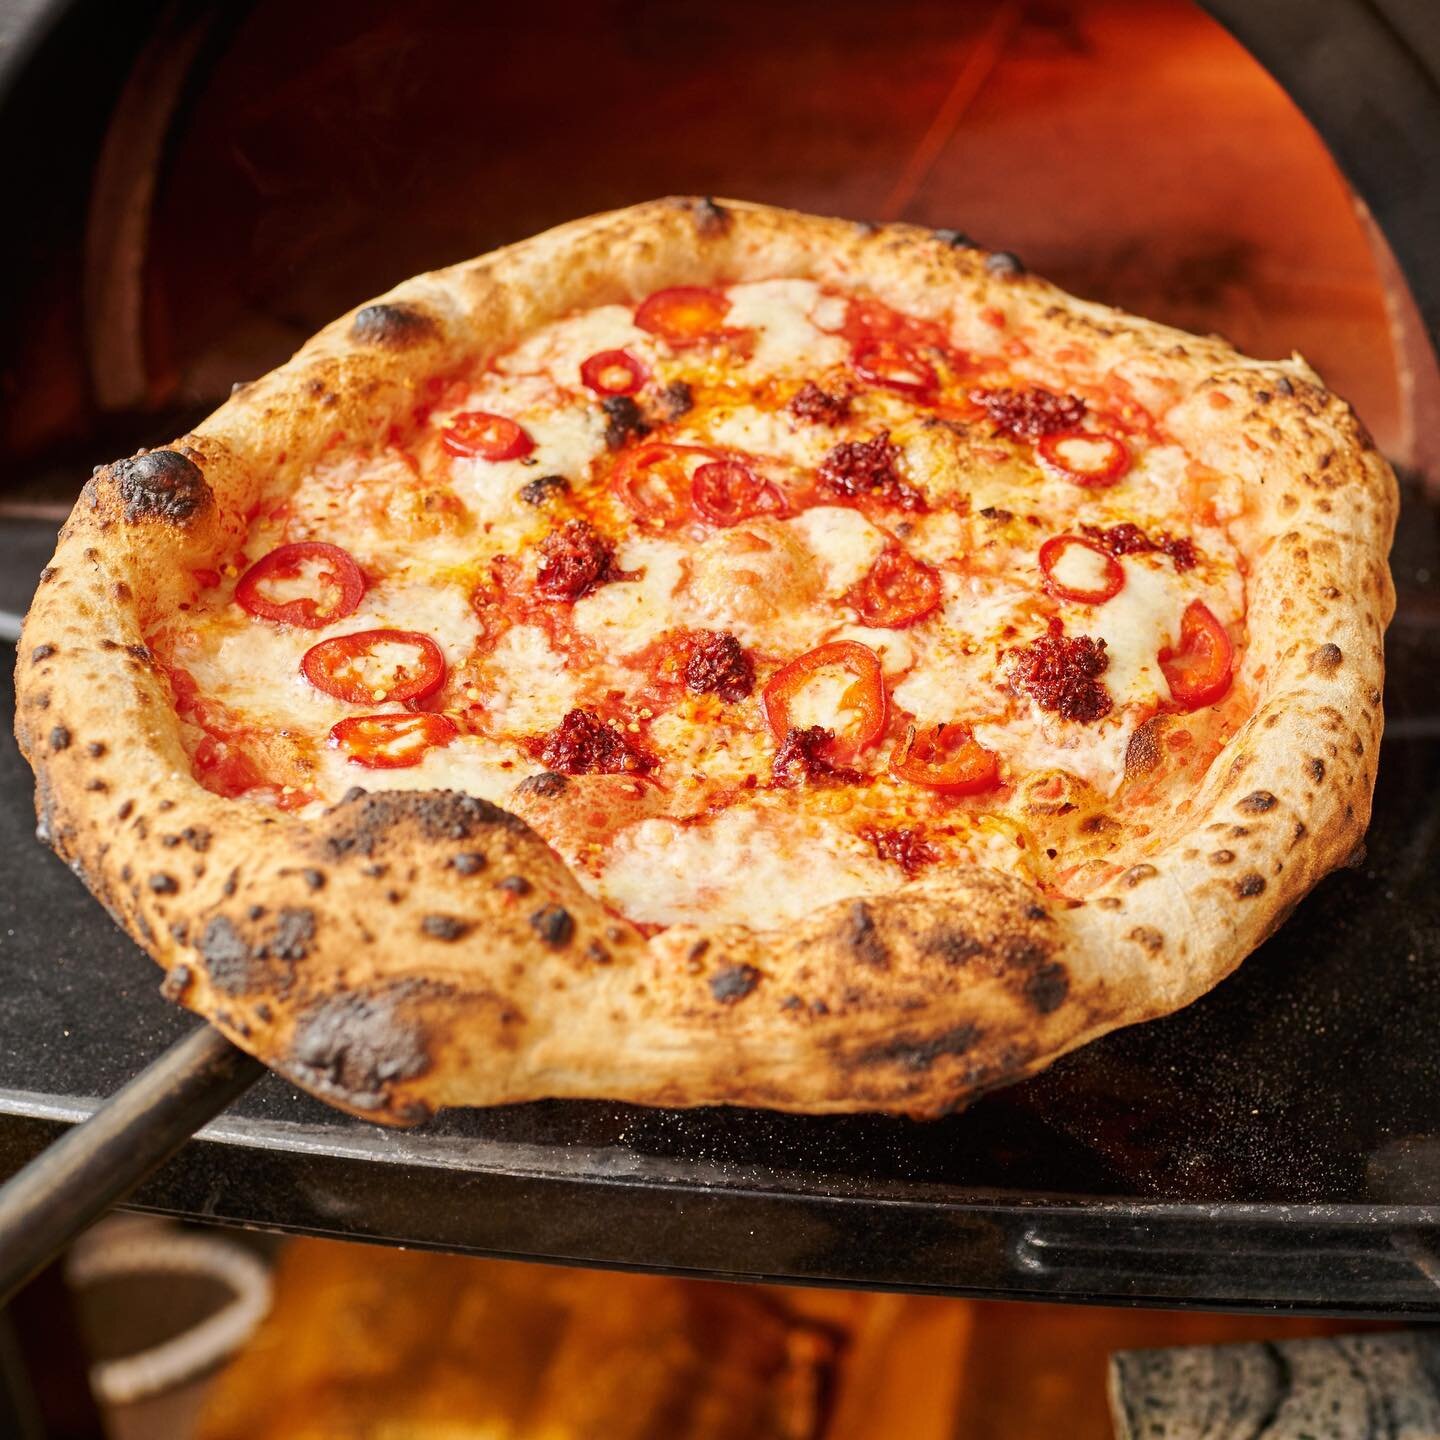 P I E F E C T I O N

Can you beat an &lsquo;Nduja pie?? Wait till you see our new releases. We have a feeling our latest menu additions will be extremely popular. #newpizza #pizzafranchise #bestpizza